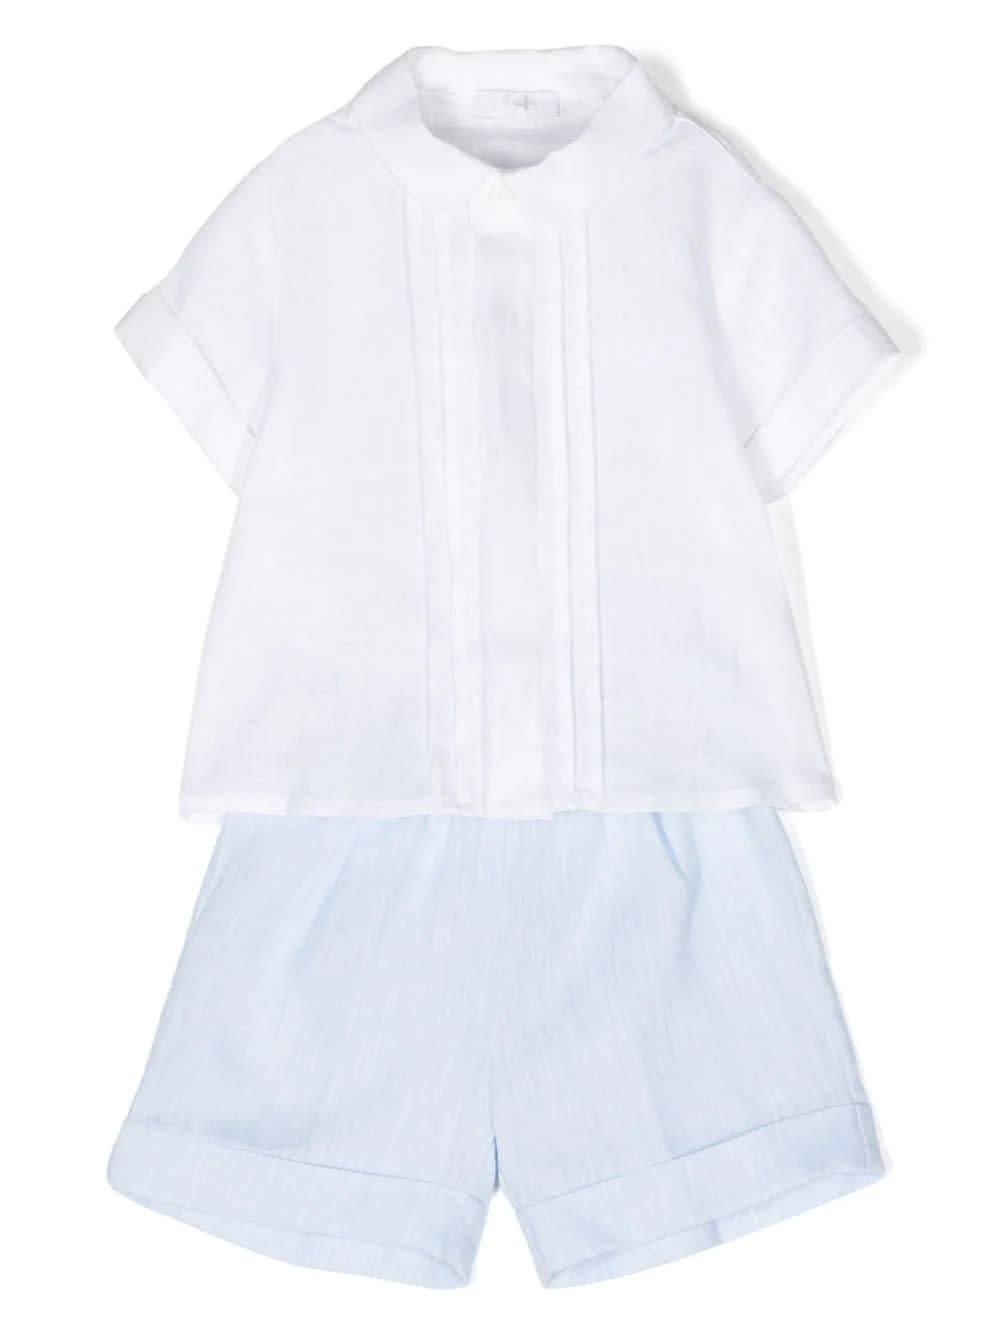 Il Gufo Babies' Two Piece Linen Set In White And Light Blue In Cielo